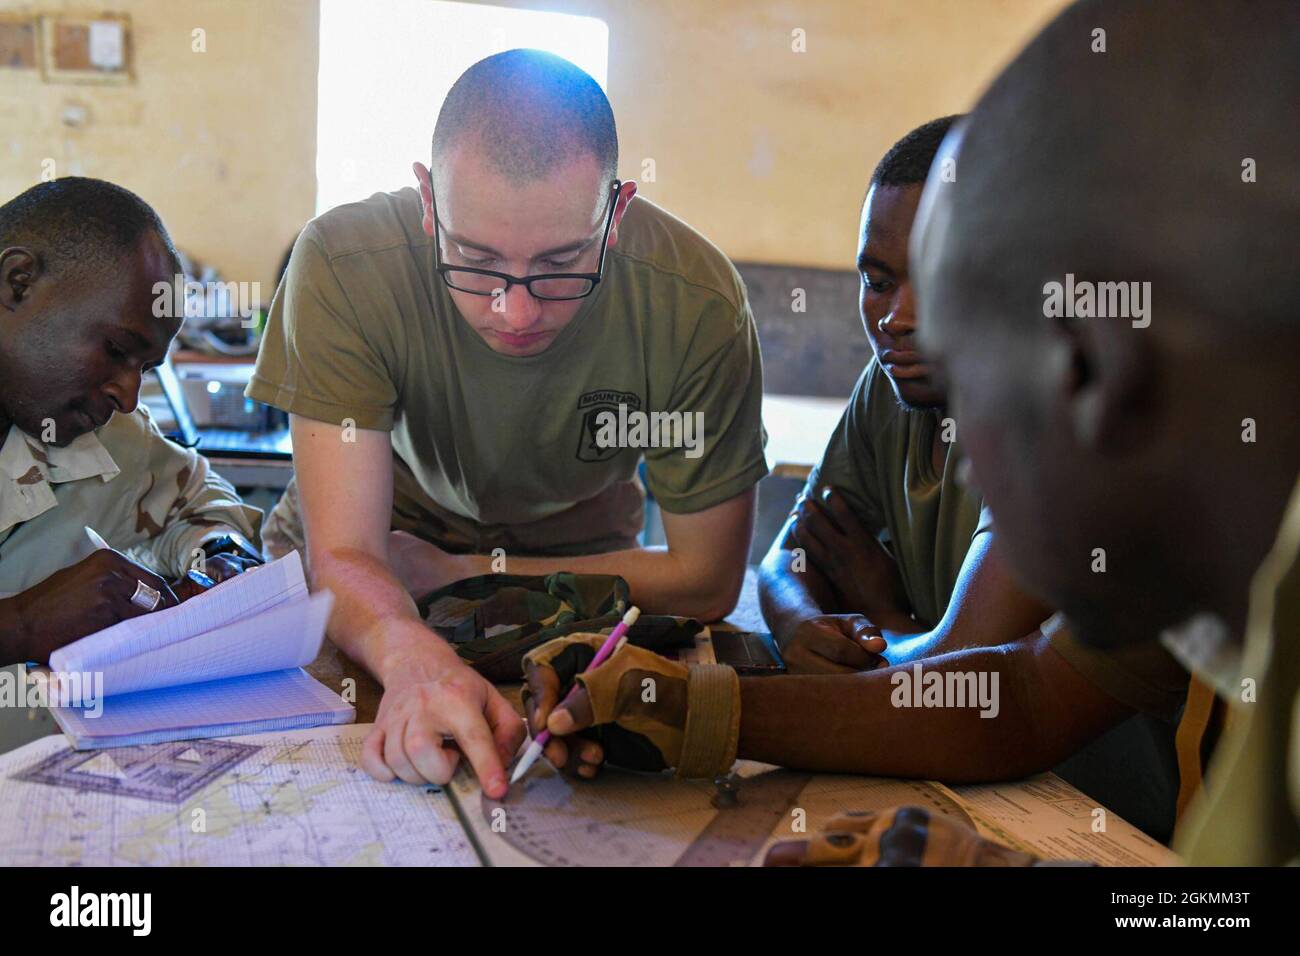 U.S. Army Spc. Brandon Bouchard assigned to Headquarters and Headquarters Company, 1st Battalion, 102nd Infantry, 86th Infantry Brigade Combat Team, in support of Combined Joint Task Force-Horn of Africa (CJTF-HOA), teaches basic mortar map skills at Tondibiah, Niger, May 25, 2021. Soldiers in basic map reading, plotting points, and drawing azimuths. Stock Photo